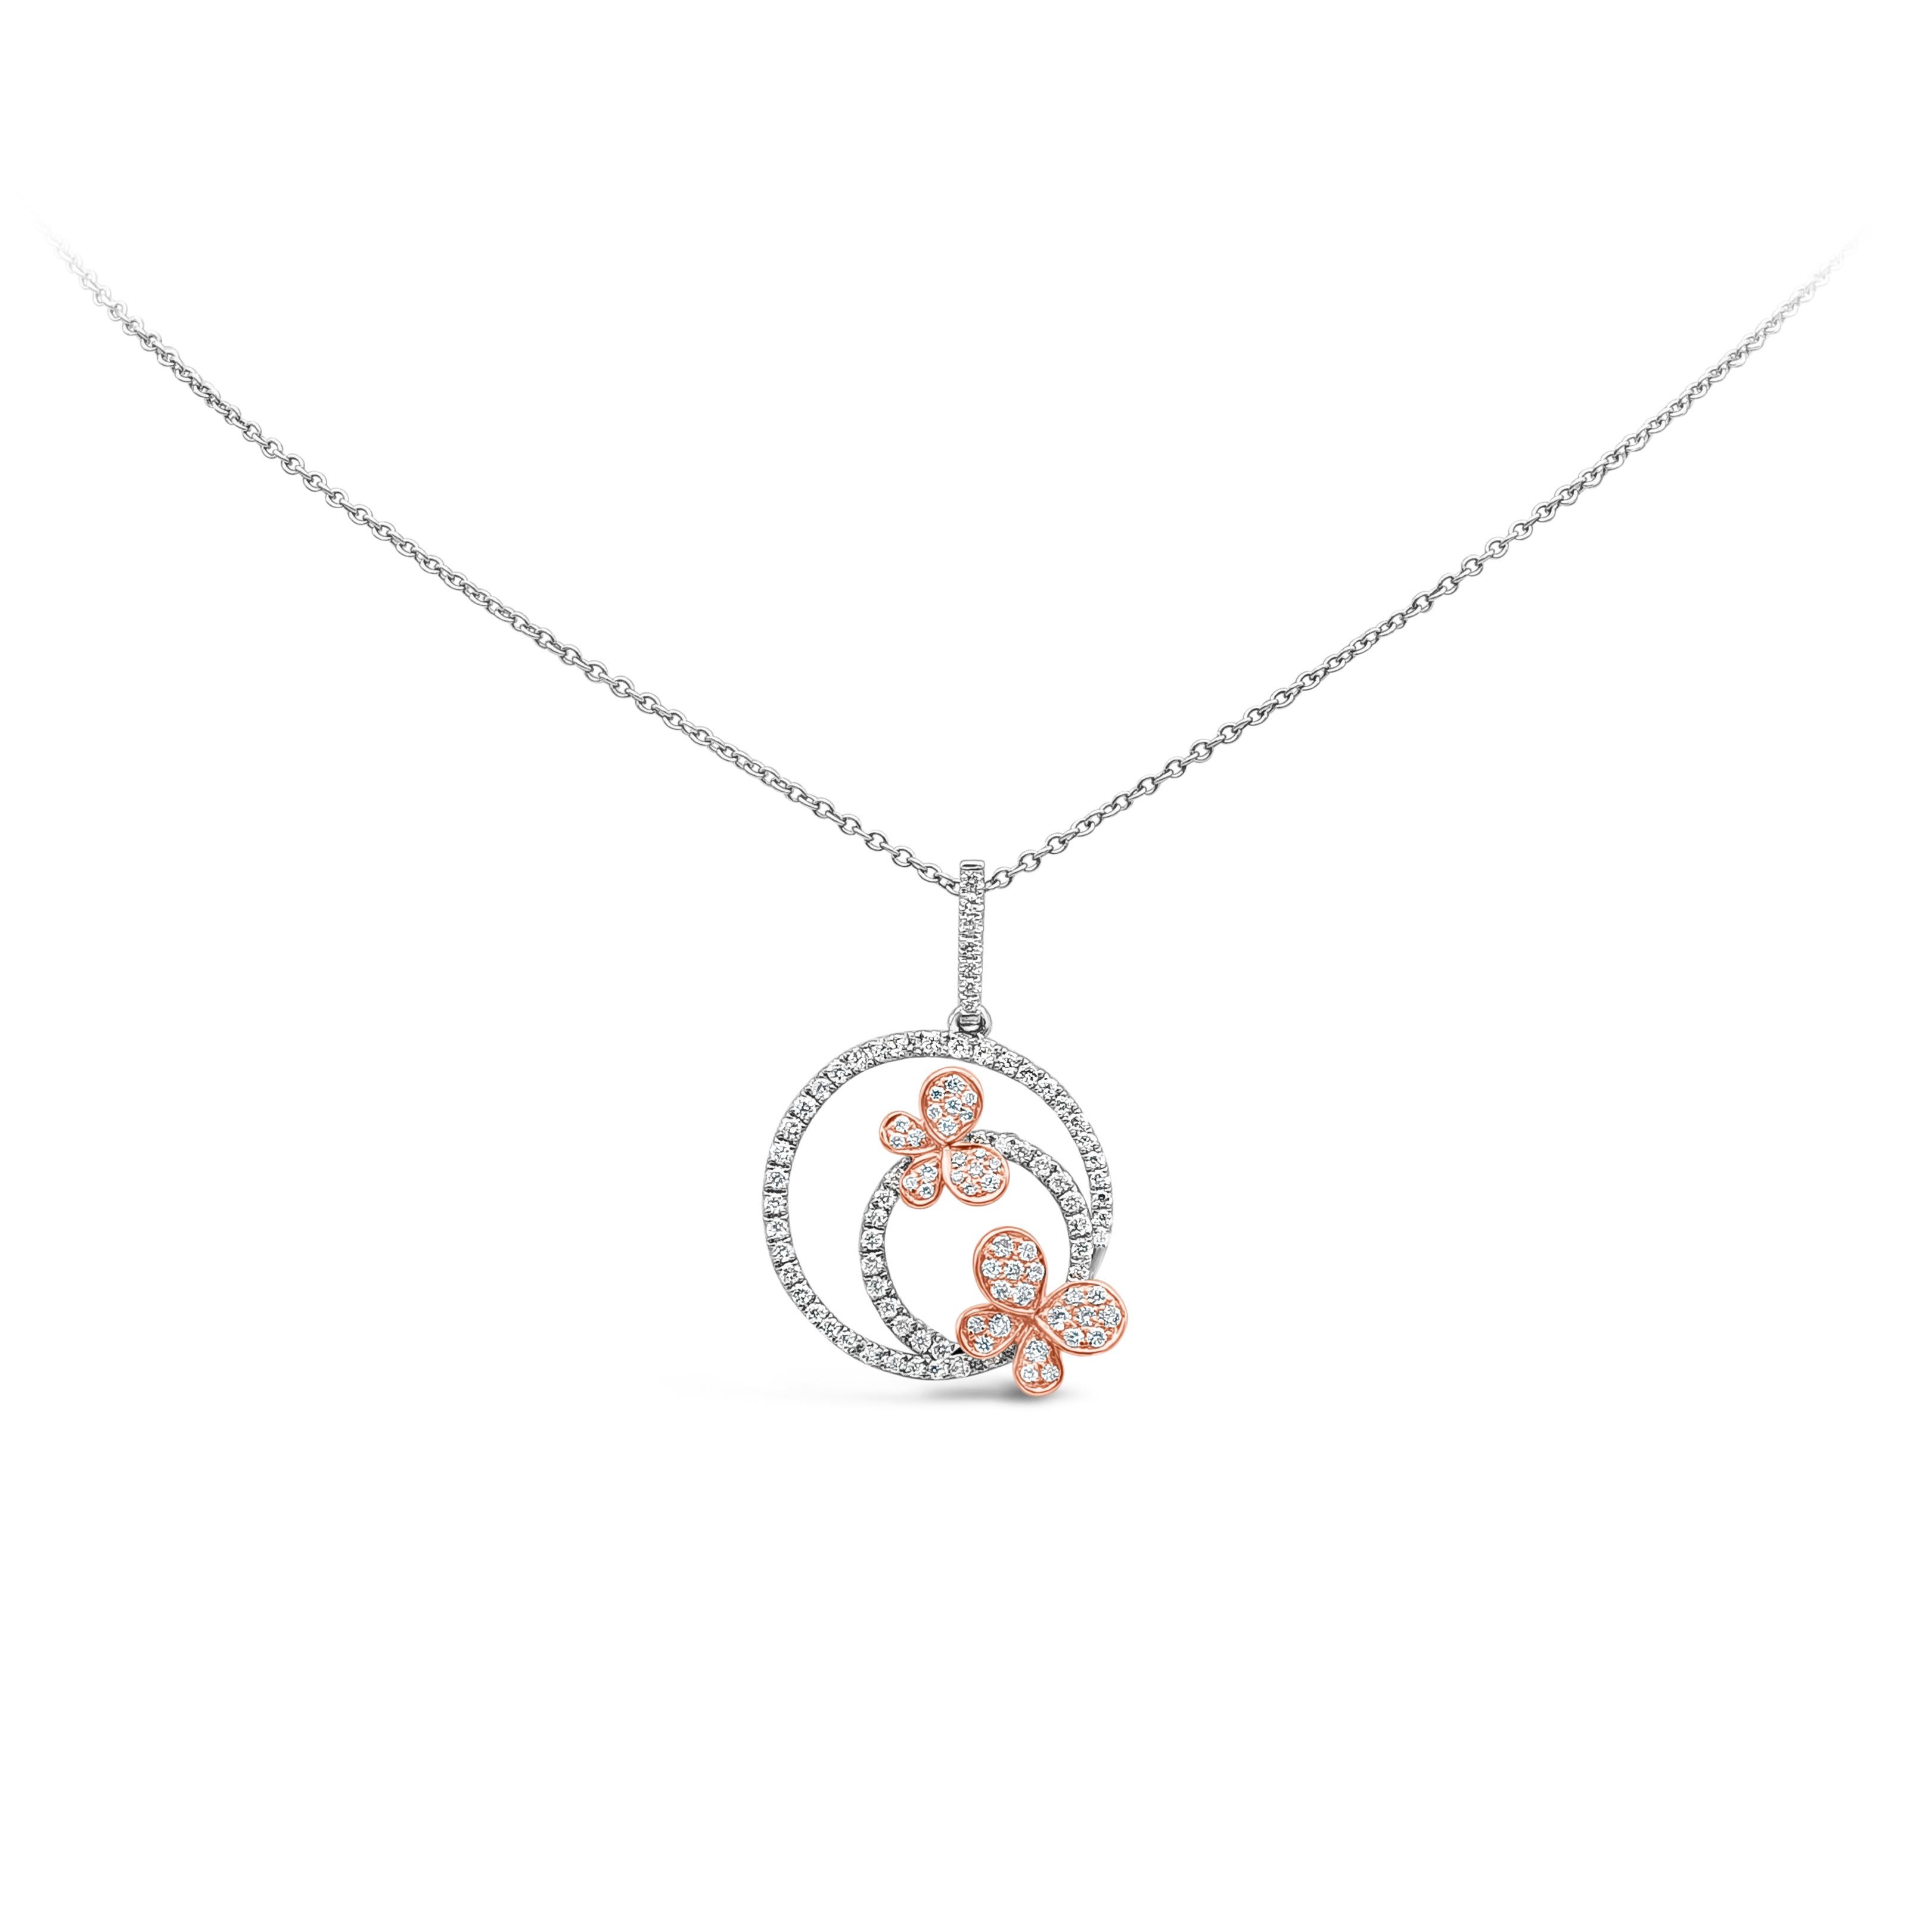 This unique and beautiful pendant necklace features open-work two concentric circles with two butterflies set, 111 pieces of round brilliant diamonds weighing 0.56 carat total, F-G Color and VS-SI in Clarity. Suspended on a diamond encrusted bail.